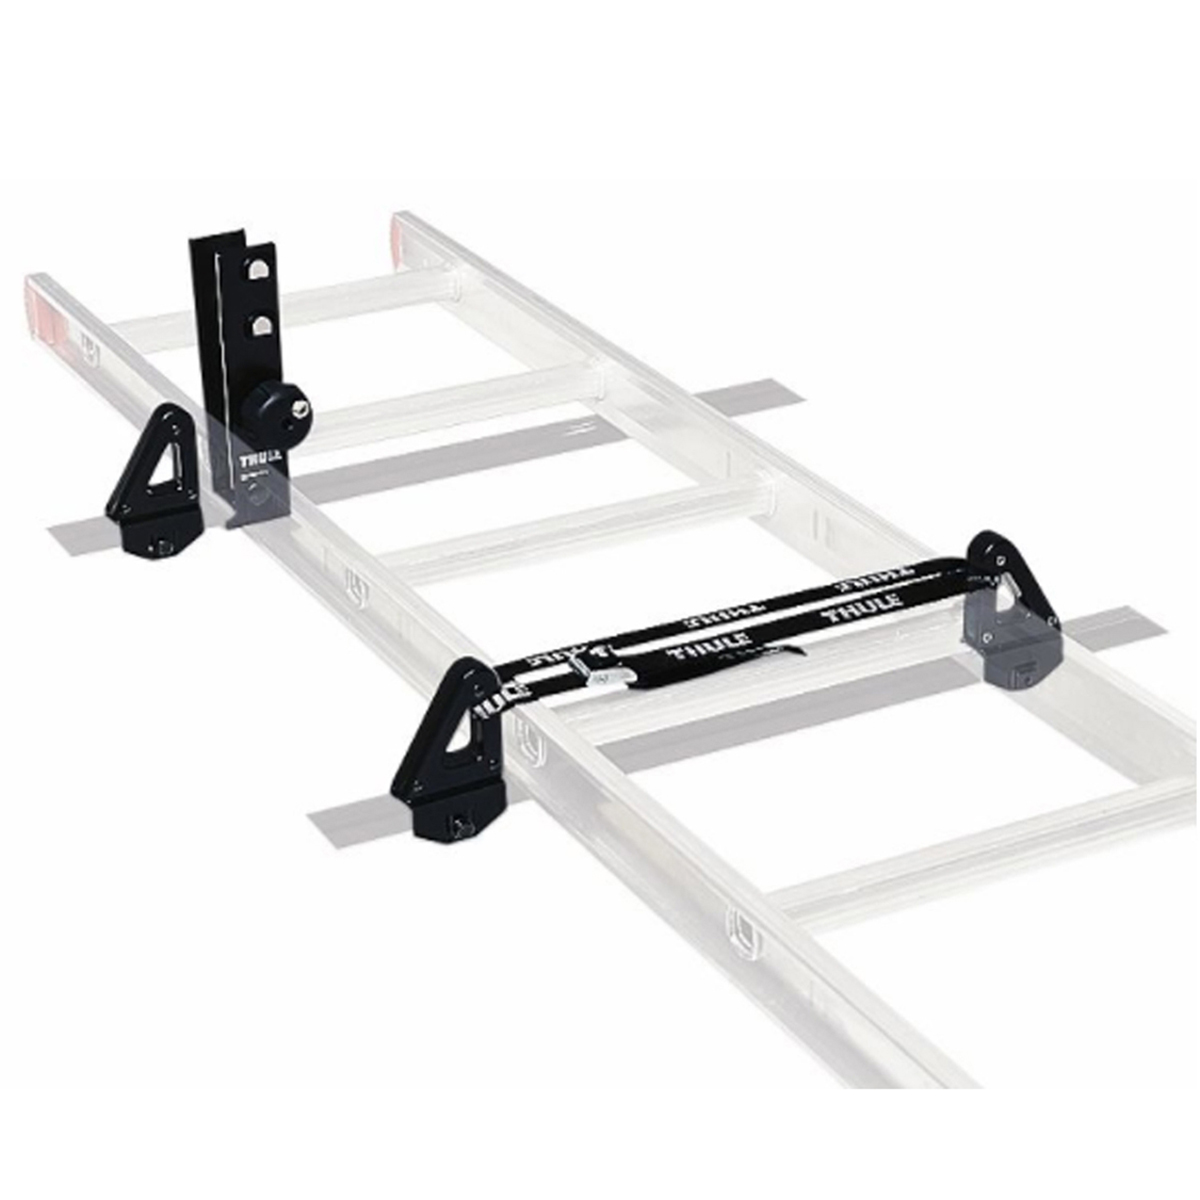 Suport fixare scara, Thule Ladder Carrier 548